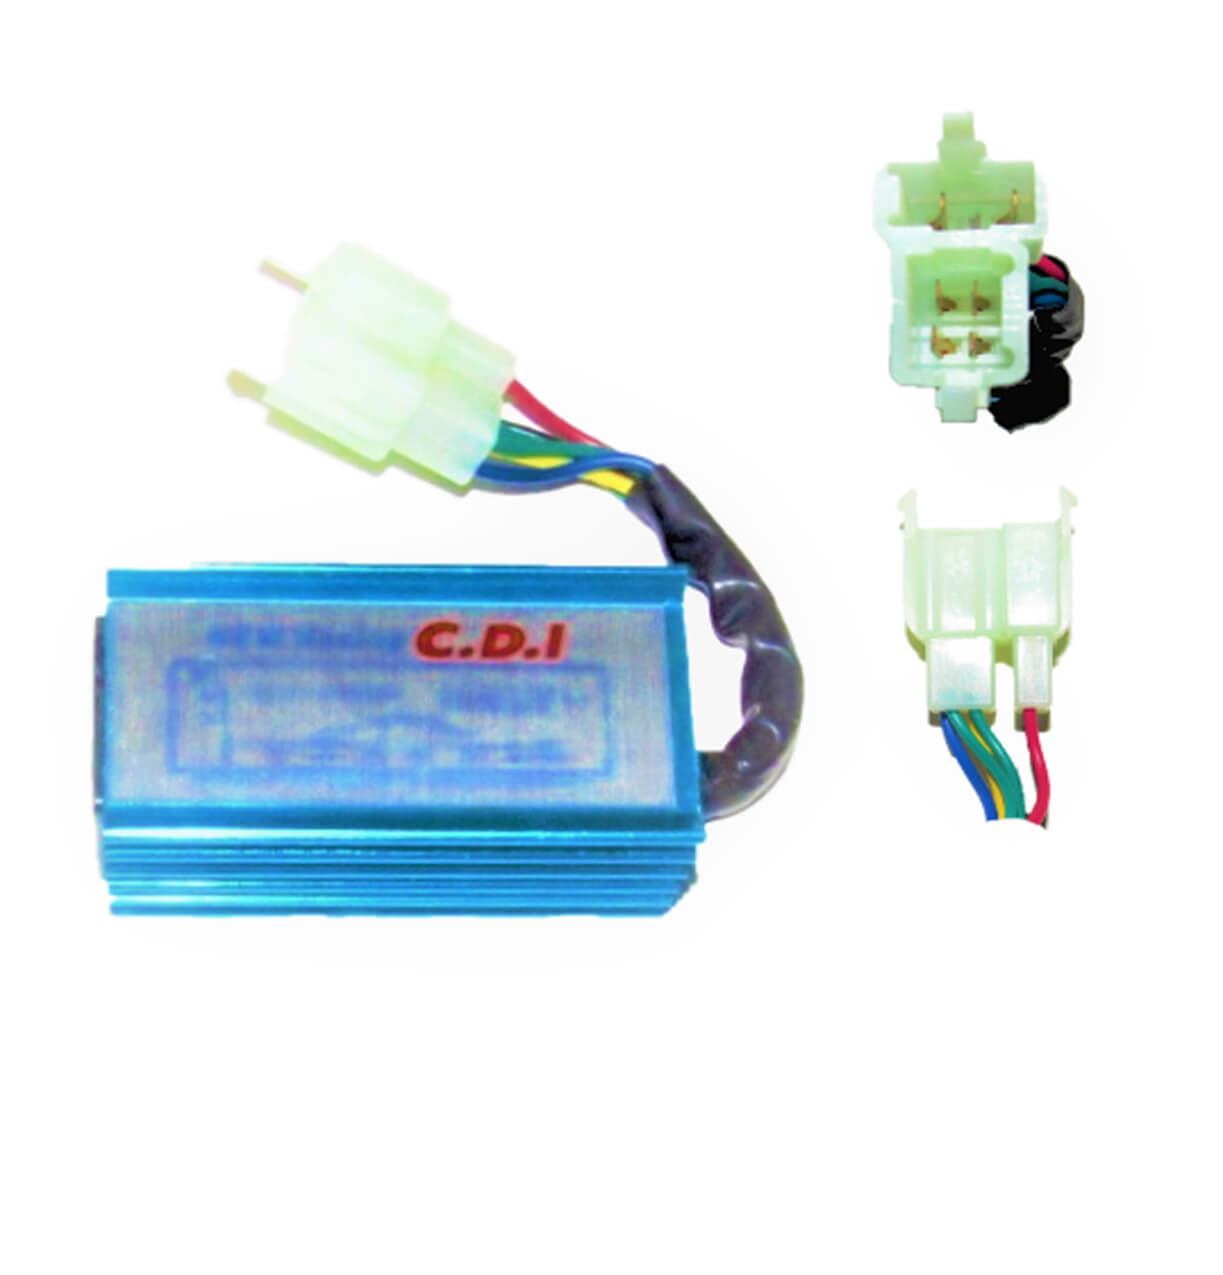 CDI Box 4 Stroke 125-150cc ATVs - Motorcycles with CG style motor High Performance 4 Pins in 4 Pin FM Jack 2 Pins in 3 Pin FM Jack 74mm x 37mm